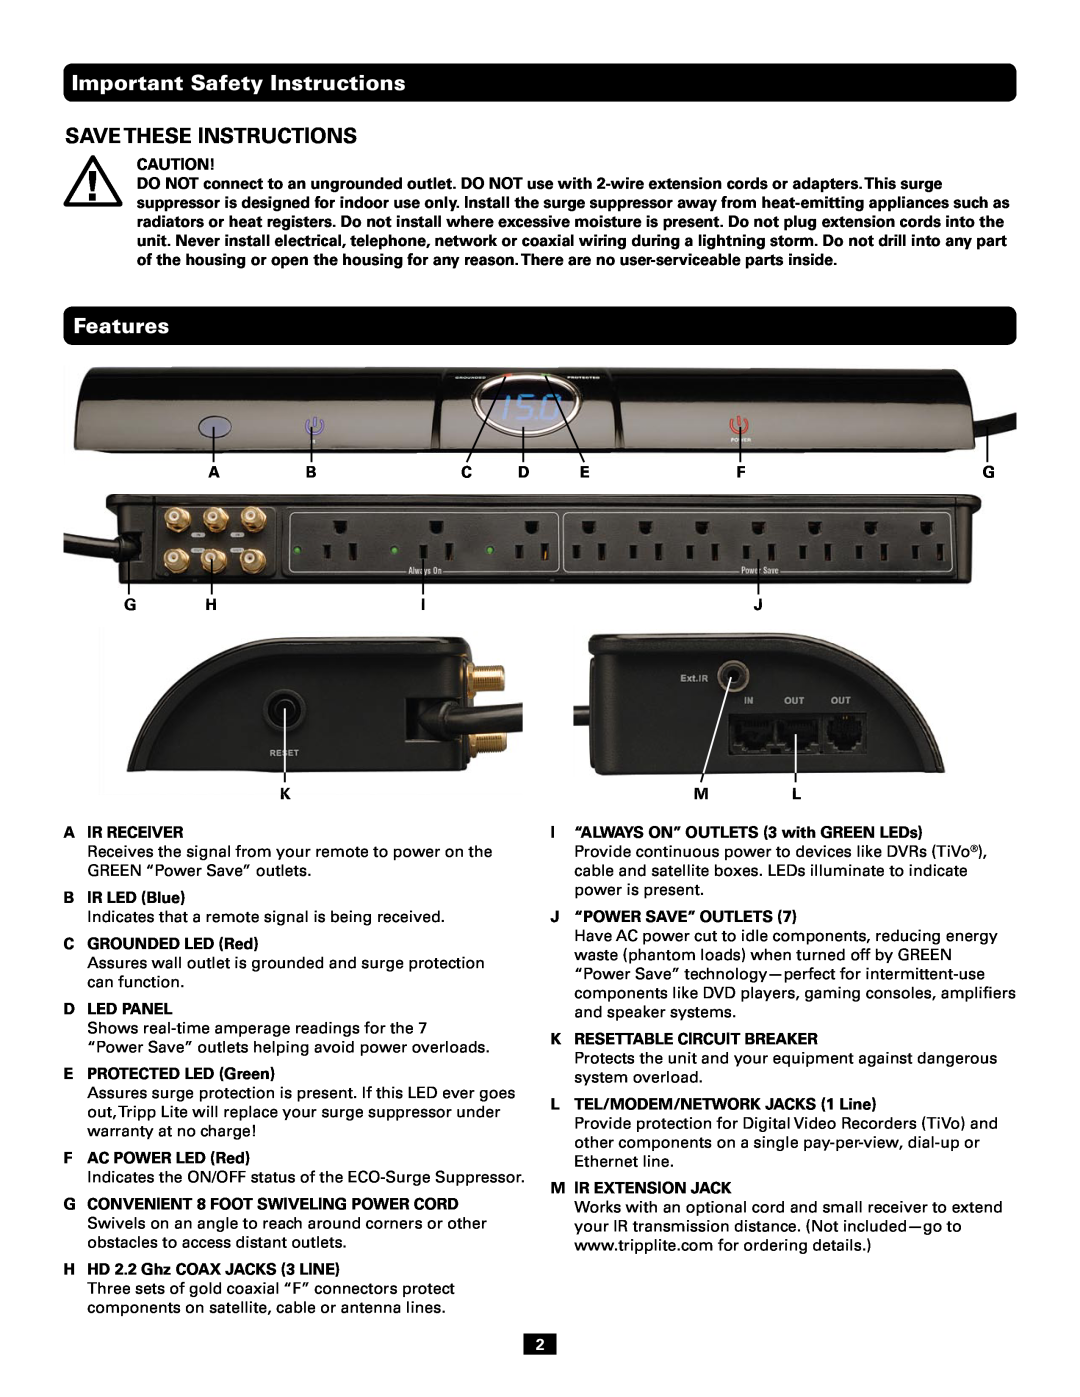 Tripp Lite AV10IRG owner manual Save These Instructions, Important Safety Instructions, Features 